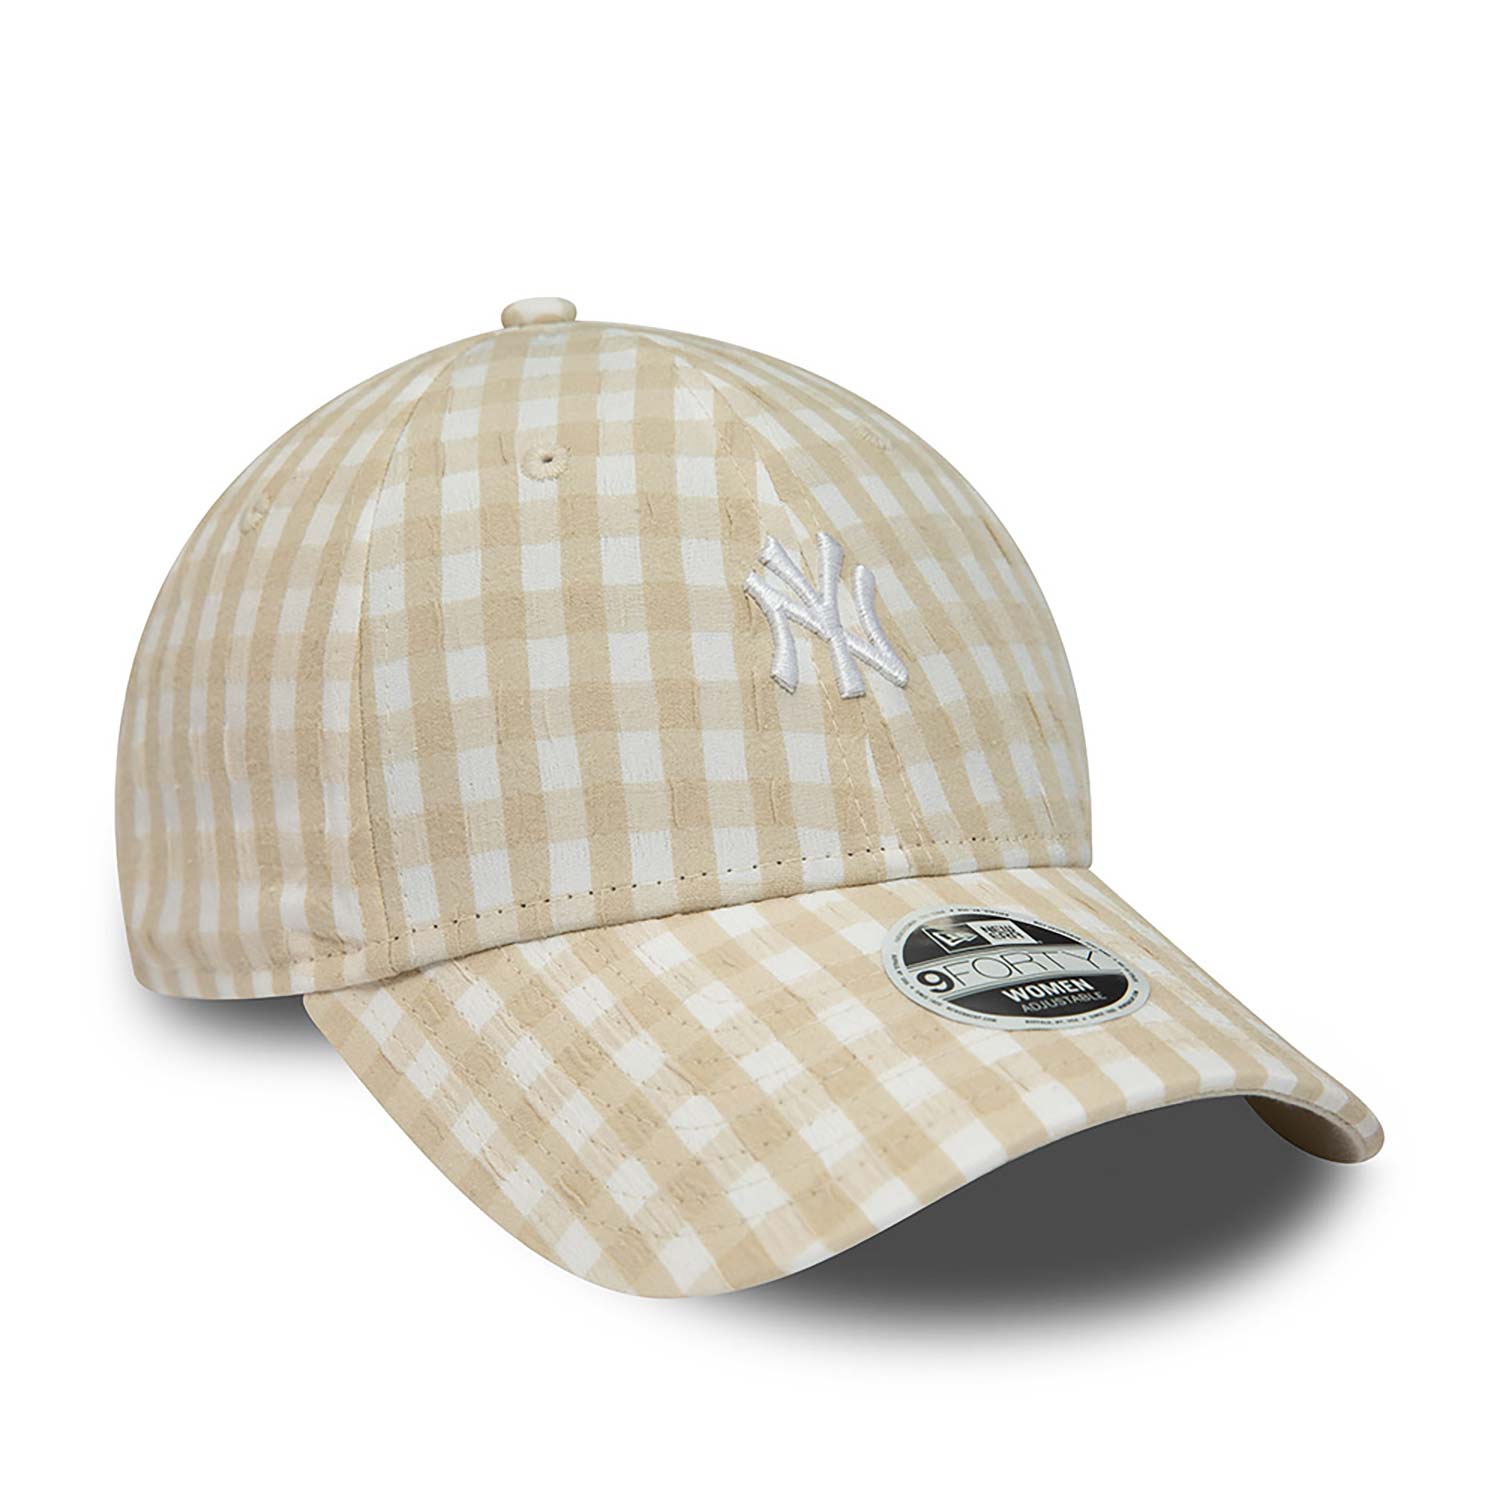 New York Yankees Womens Gingham Stone 9FORTY Adjustable Cap